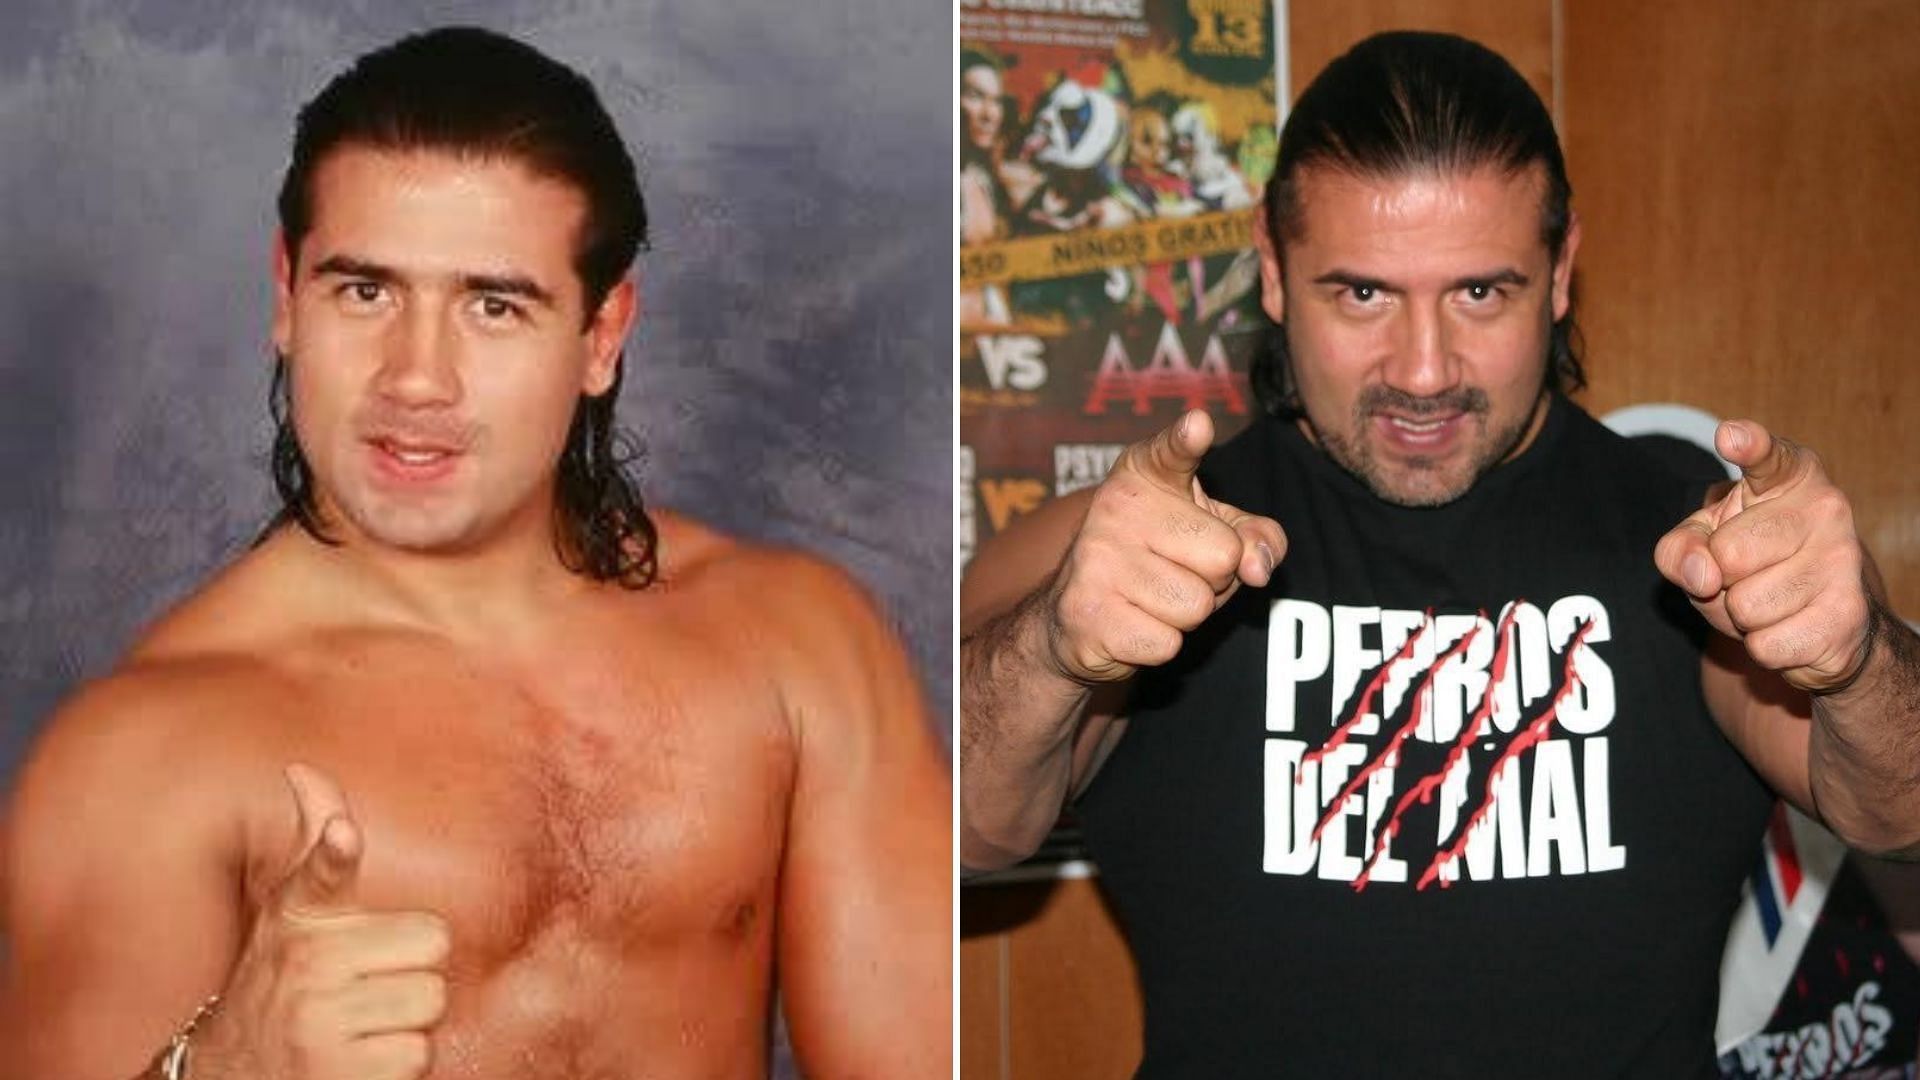 Hector Garza passed away on May 26th, 2013. 